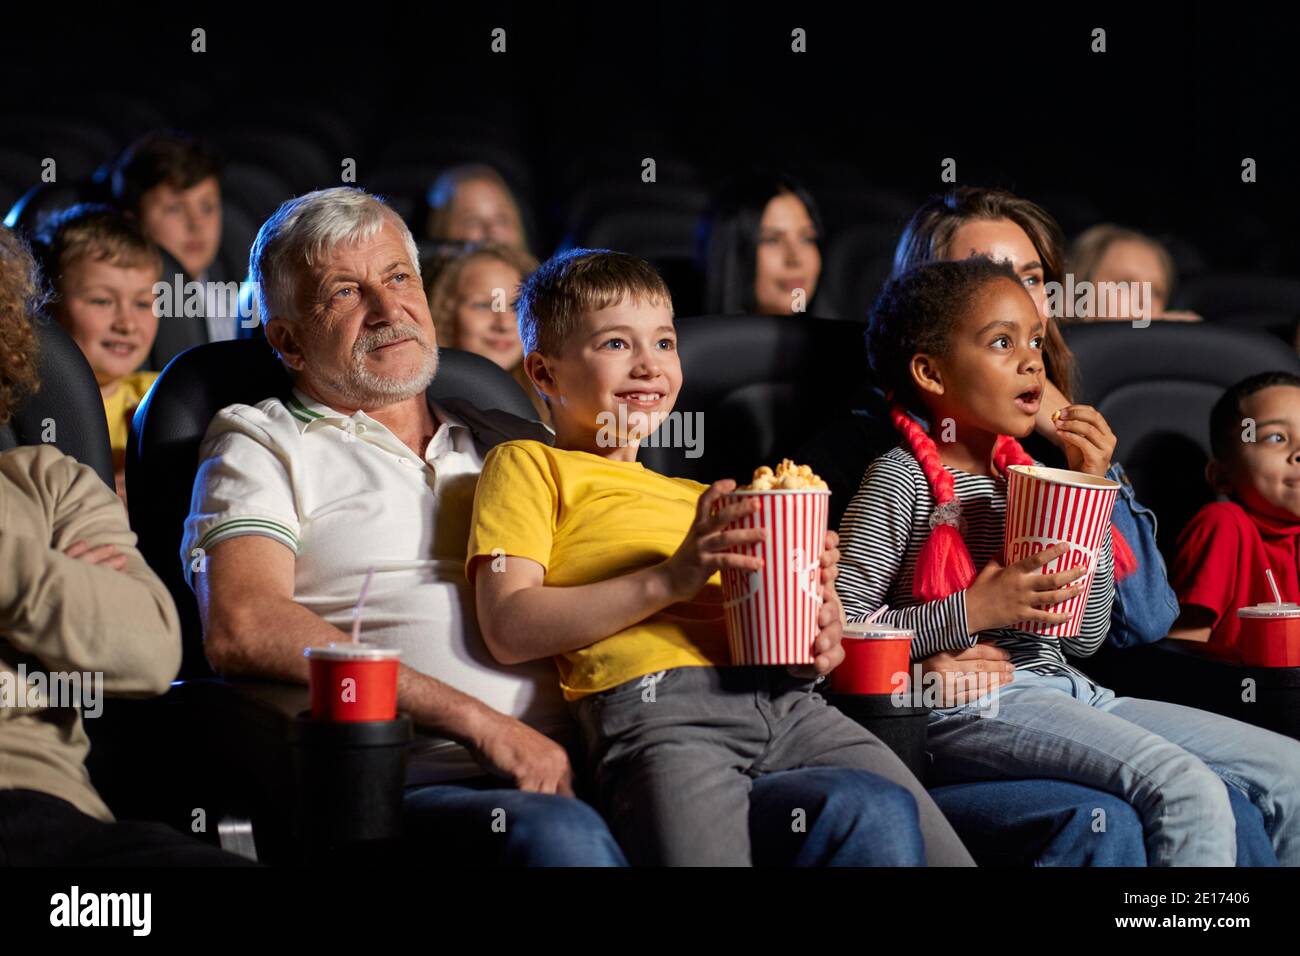 Little african girl with caucasian woman and caucasian boy with senior grandfather. Side view of multiracial kids holding popcorn and sitting on knees of parents. Family, entertainment concept. Stock Photo